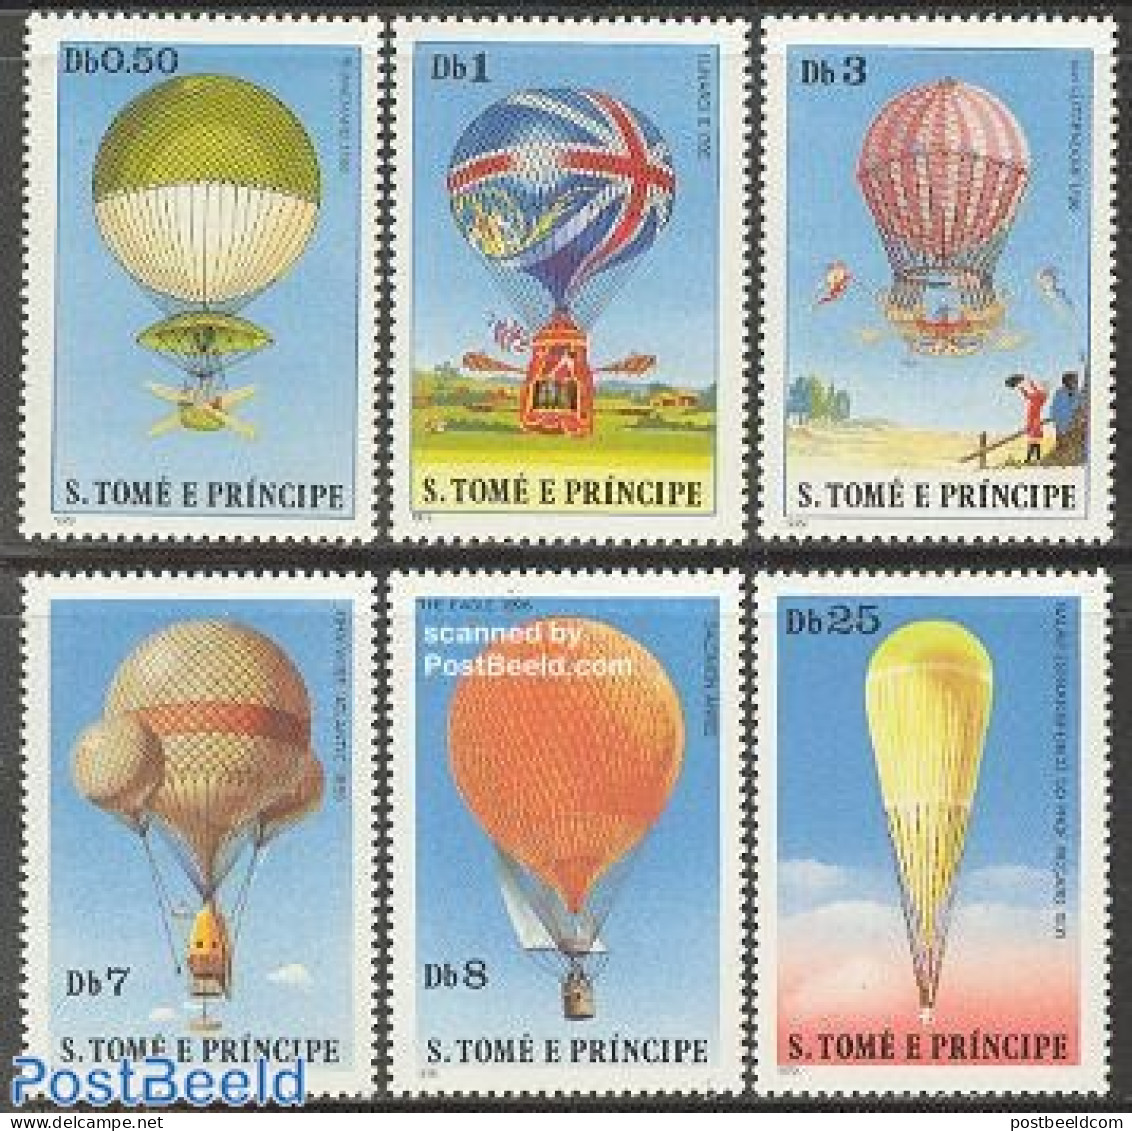 Sao Tome/Principe 1979 Aviation History, Balloons 6v, Mint NH, Transport - Balloons - Montgolfier